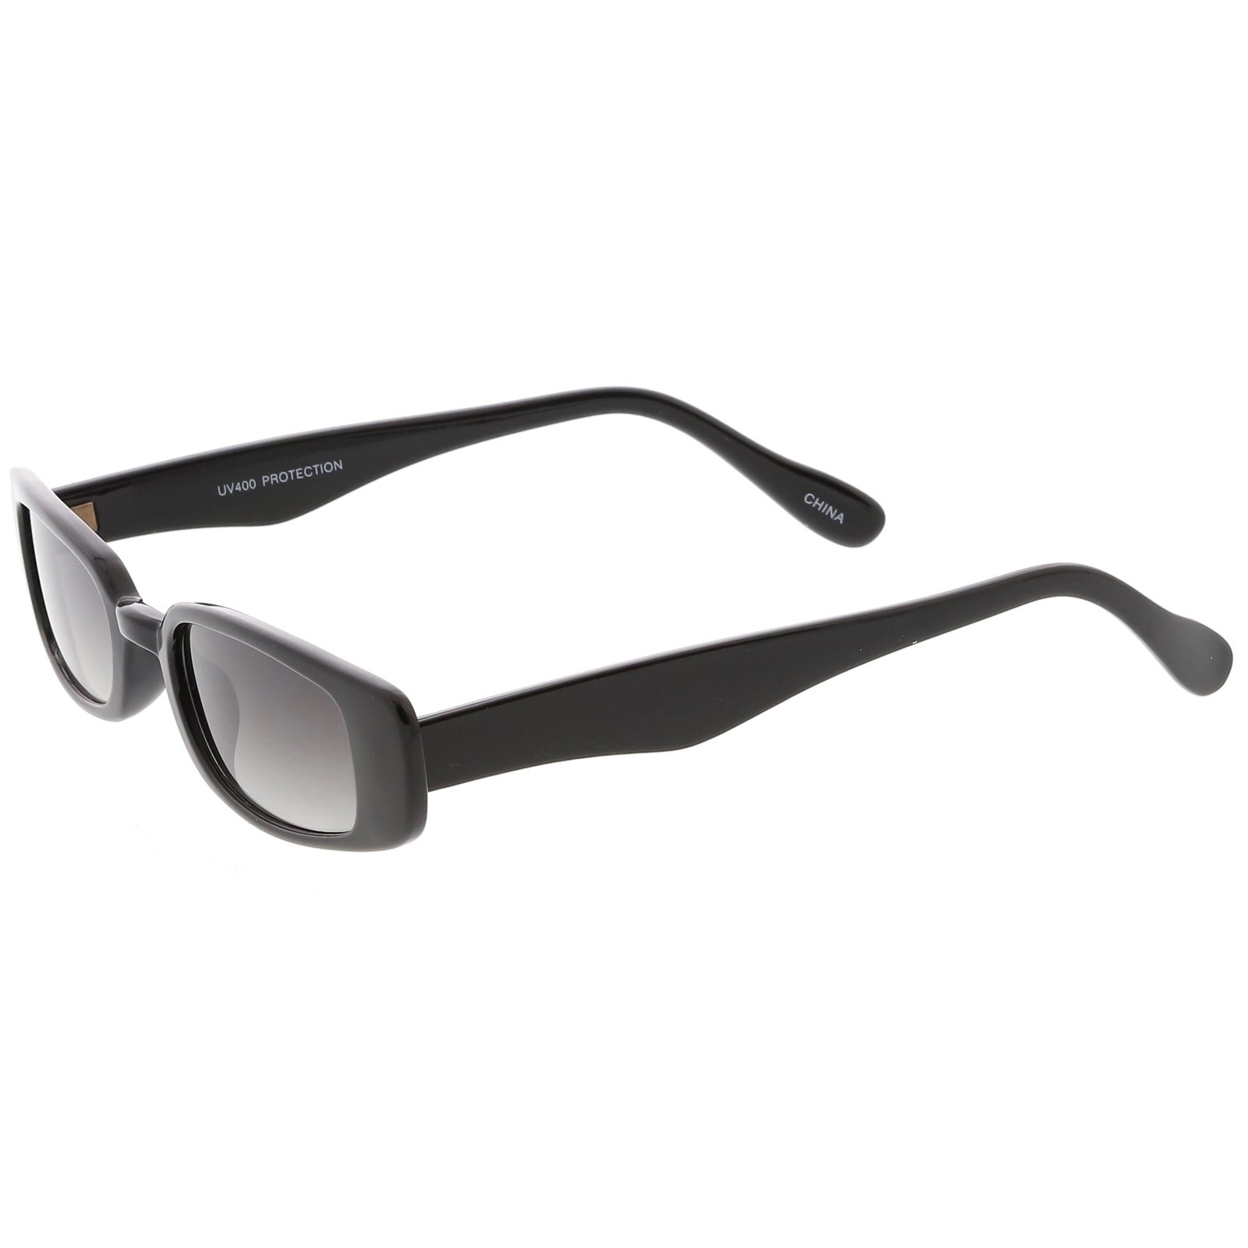 Extreme Thin Small Rectangle Sunglasses Neutral Colored Lens 49mm - White / Smoke